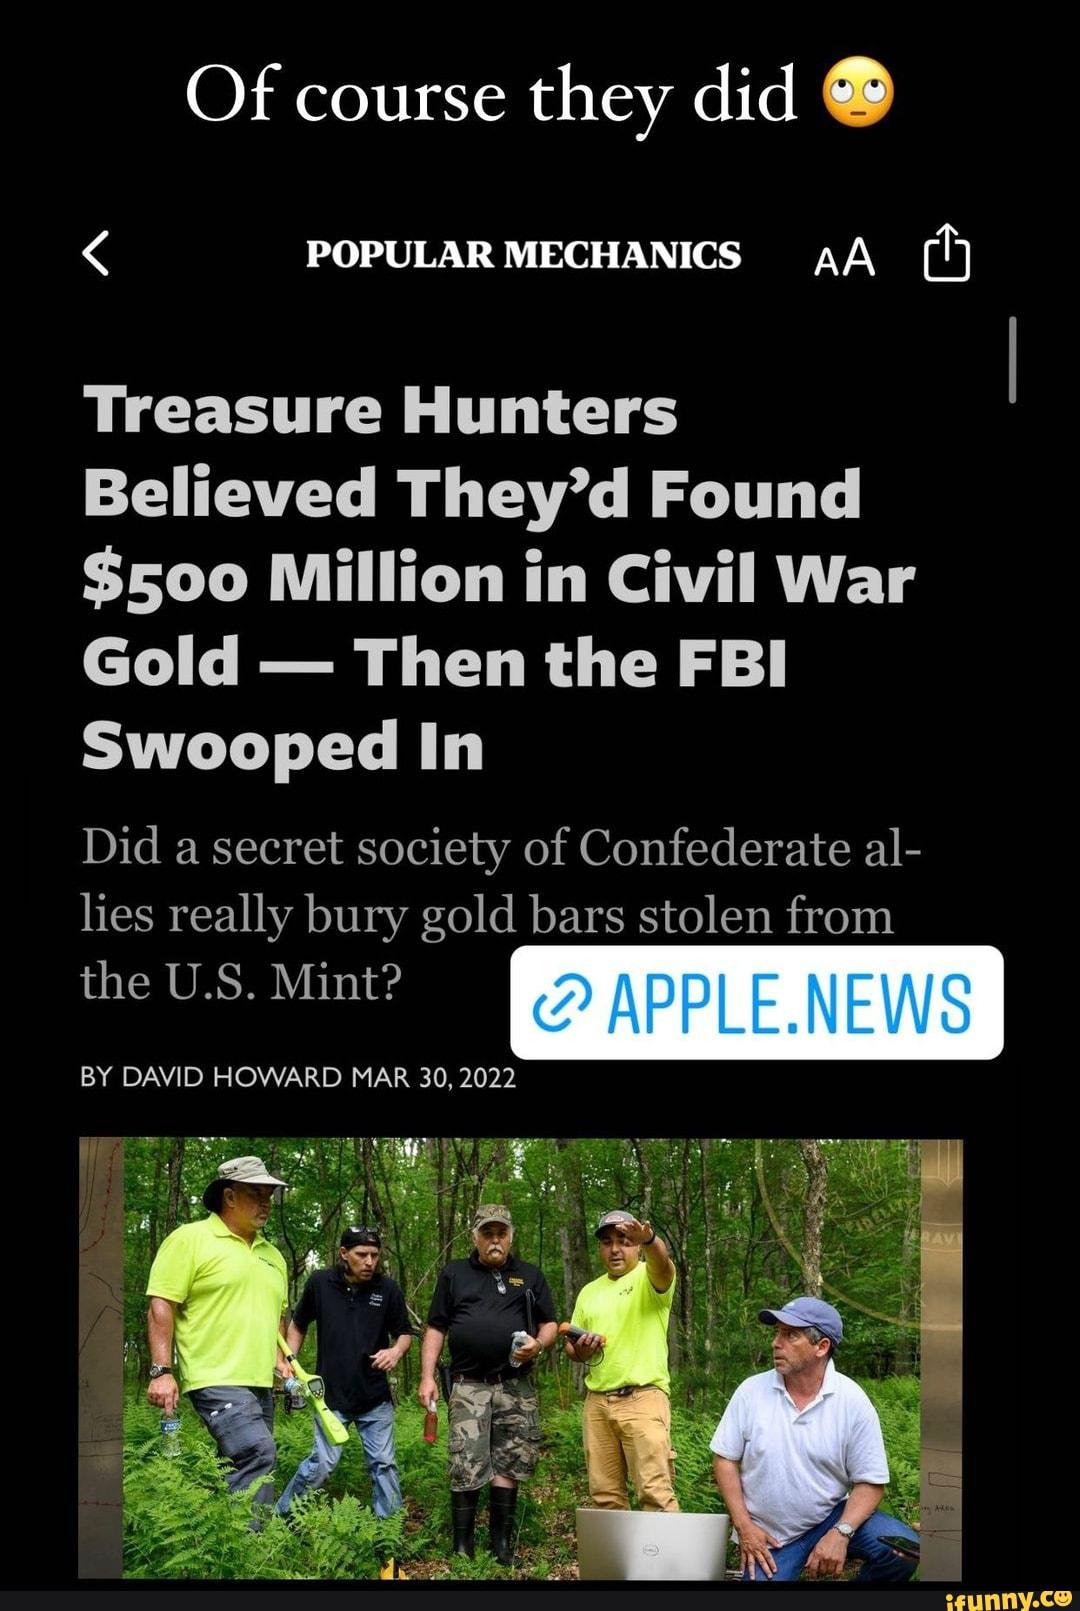 Treasure Hunters Believed They’d Found 0 Million in Civil War Gold. Then the FBI Swooped In. 